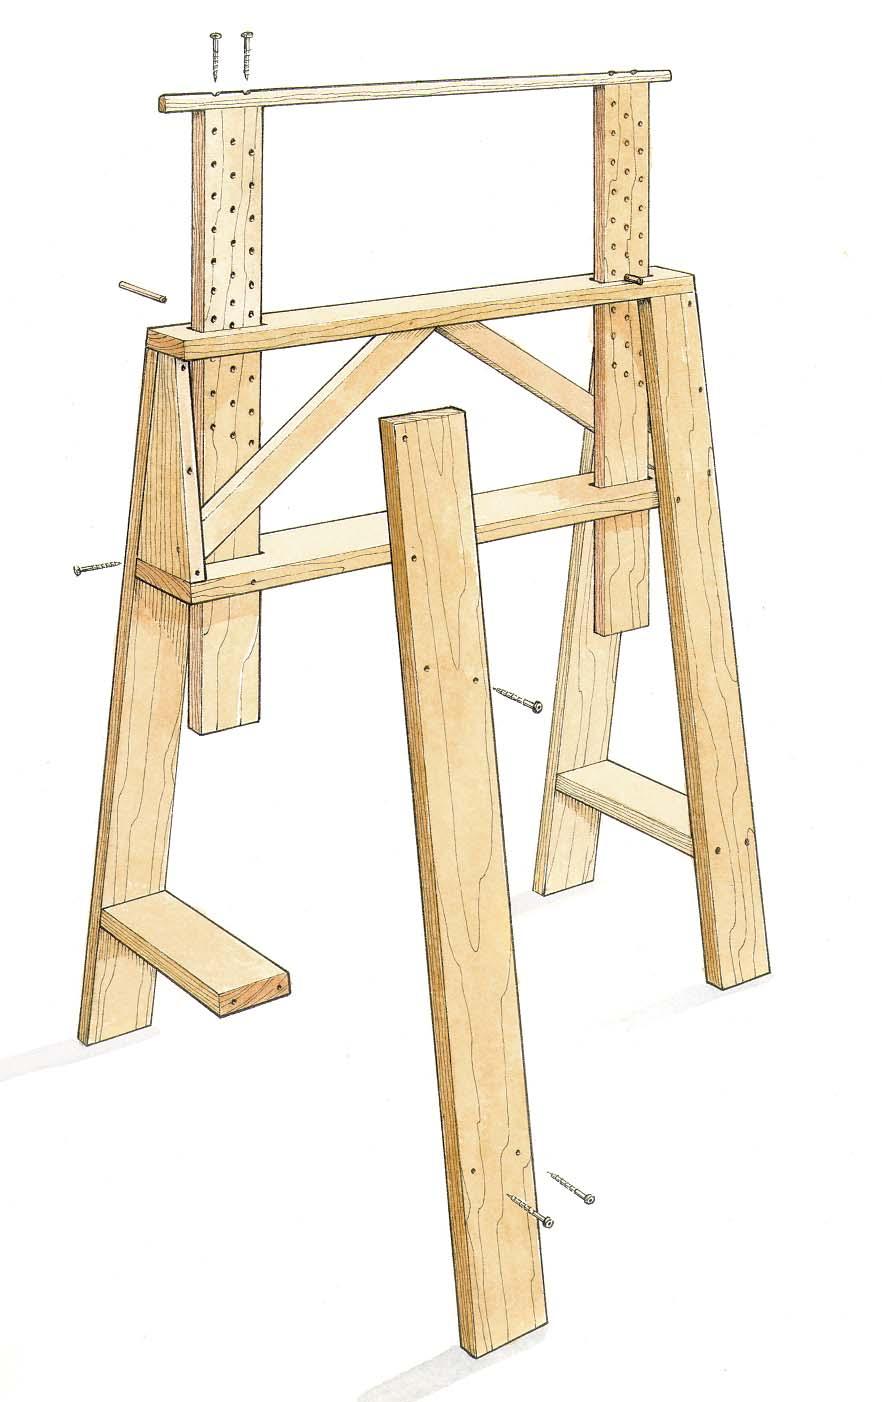 TALL HORSE IS ADJUSTABLE IN HEIGHT The extenders on this horse raise your work to a comfortable height.